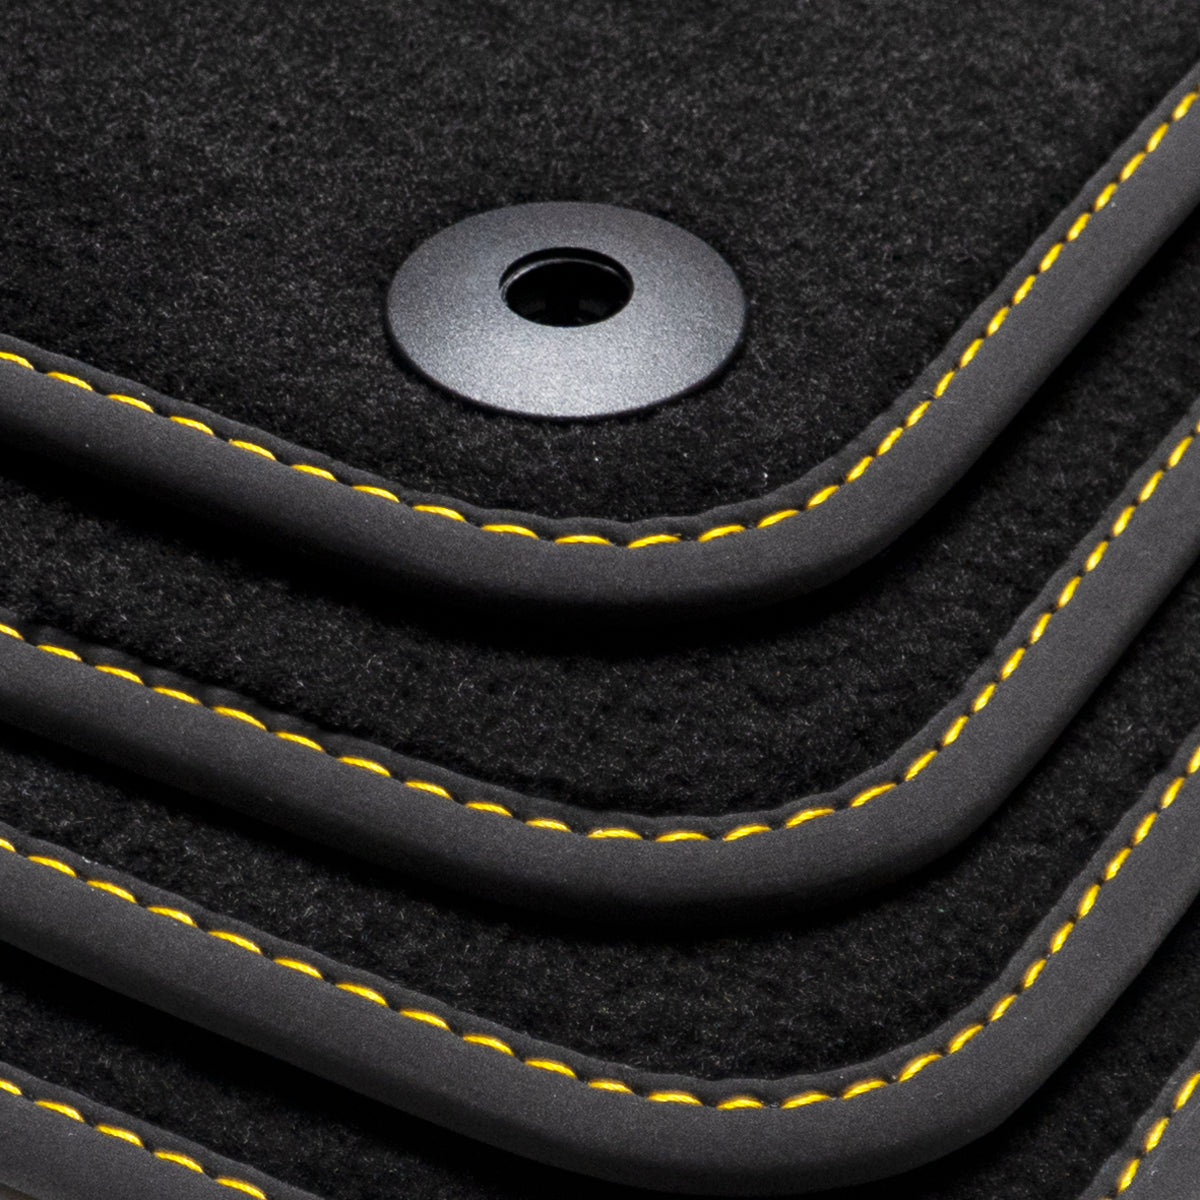 Volvo S40 & V50 Floor Mats - S40 Second Generation and V50 - Yellow Stitching